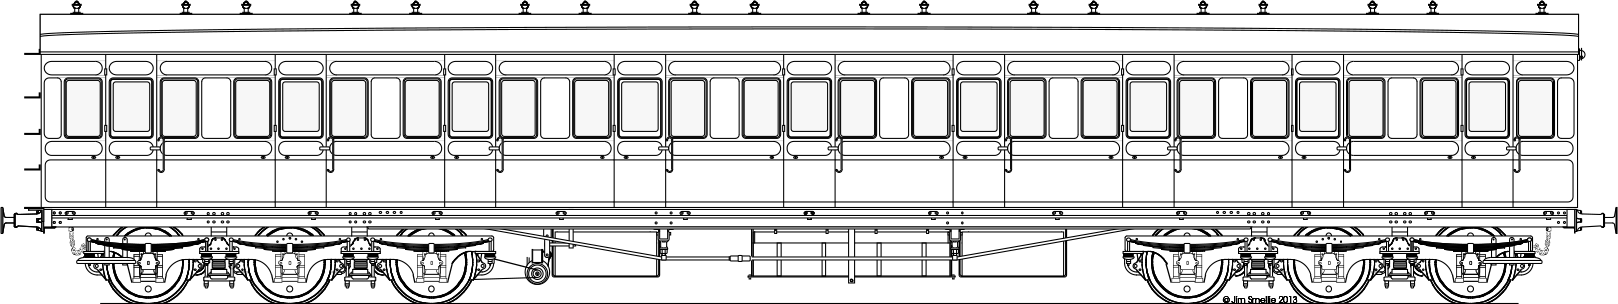 Scale drawing of D102